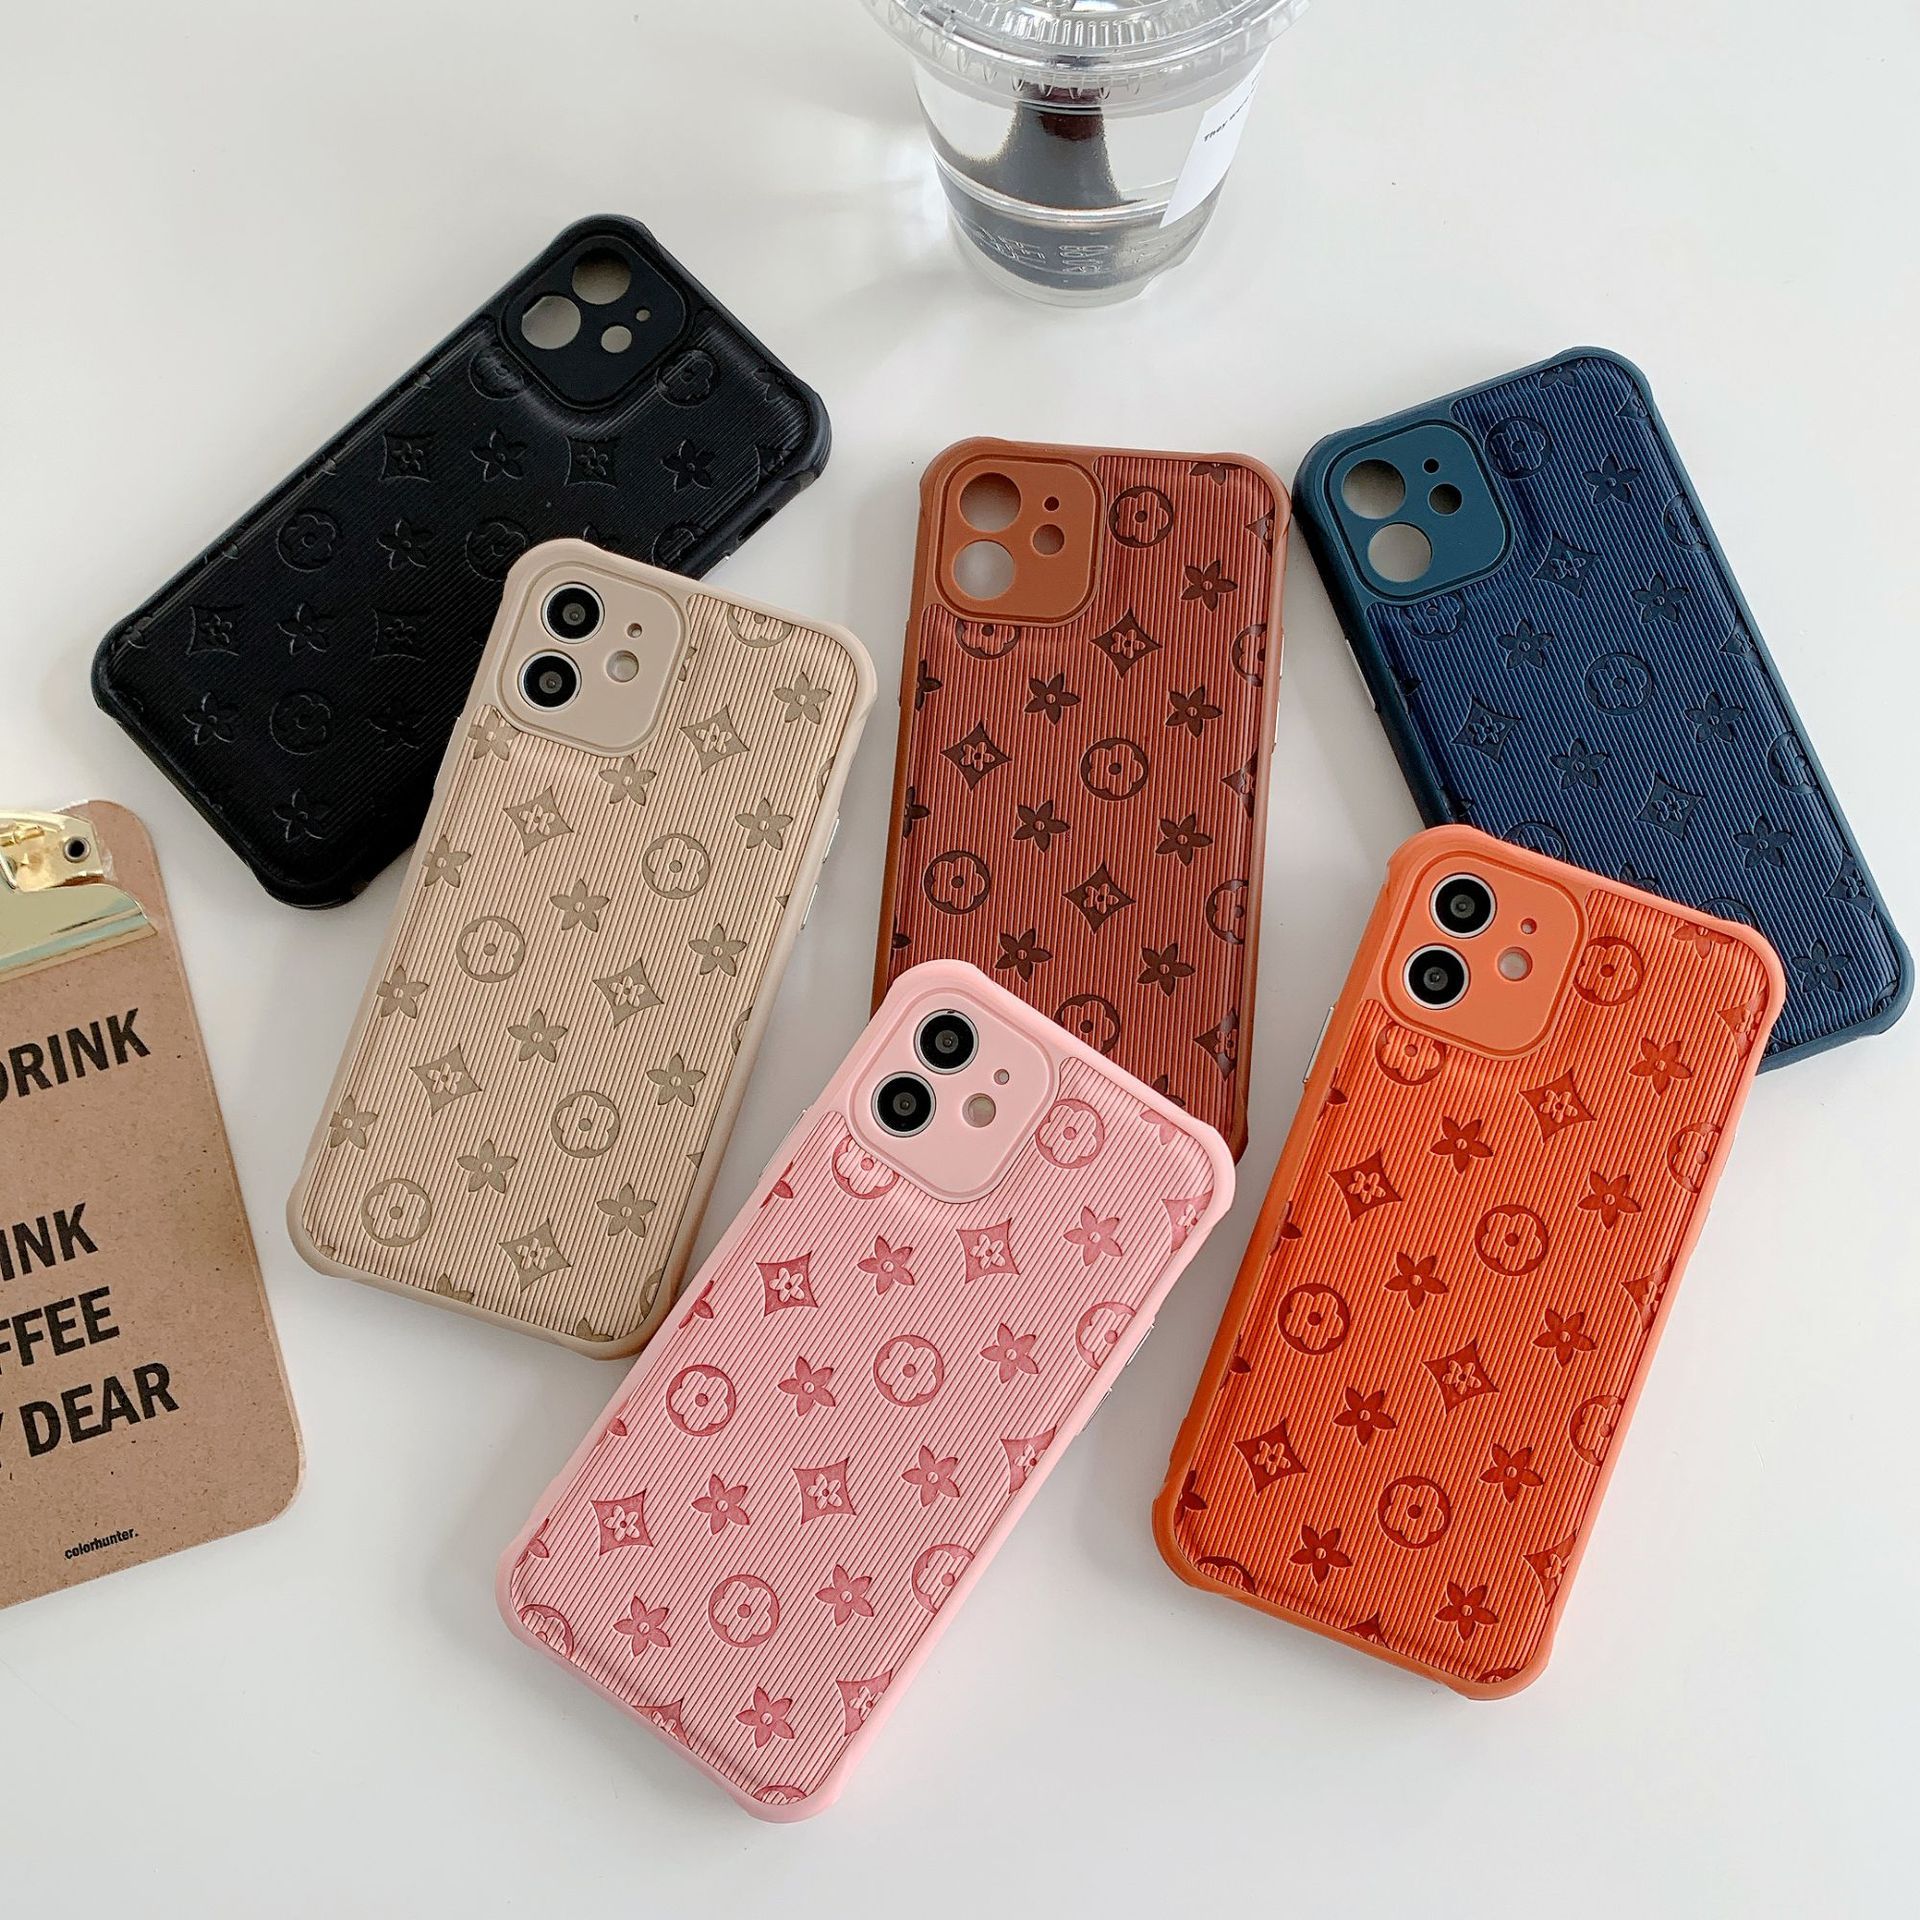 Luxury Case Iphone 13 12 Pro 11 X Xs Xr Fashion Cover Phone 14 Max